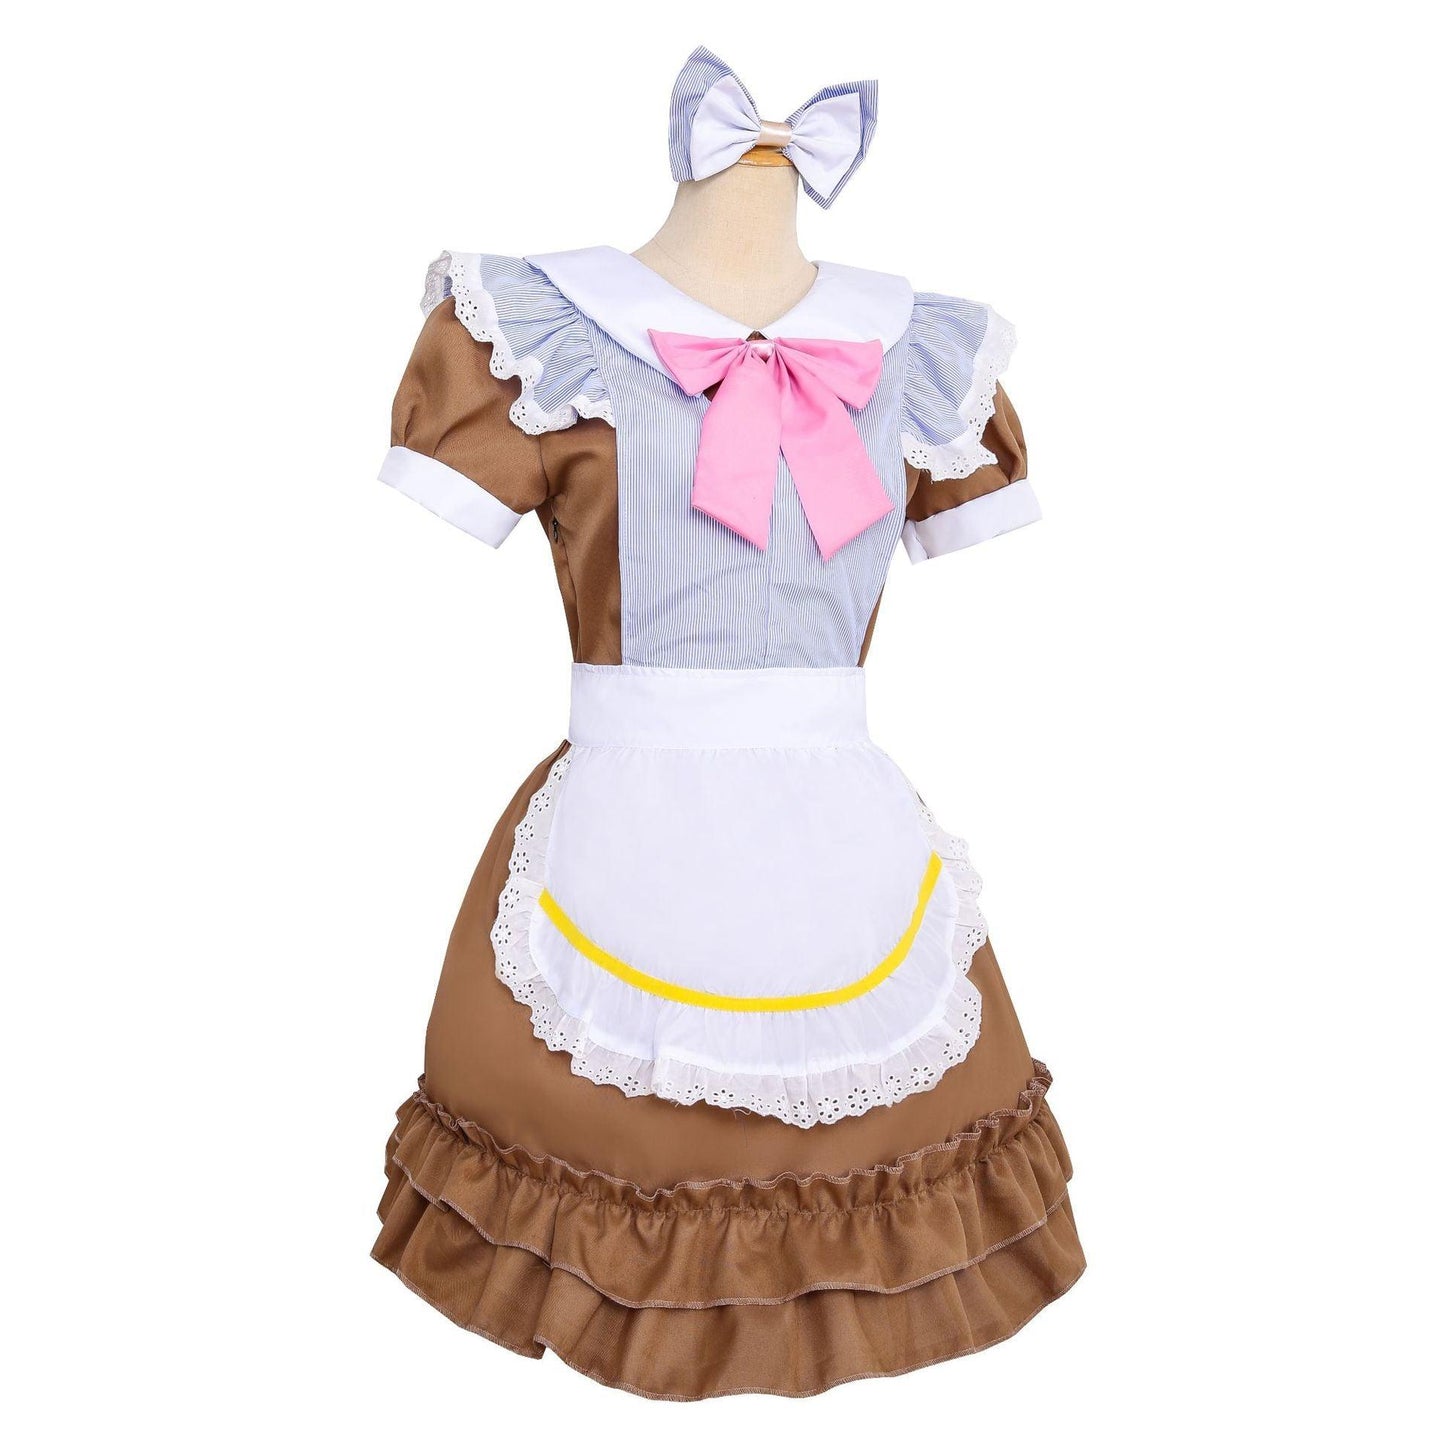 Anime Different World Restaurant Cafe Work Cloth Maid Outfit Lolita Dress Cosplay Costume